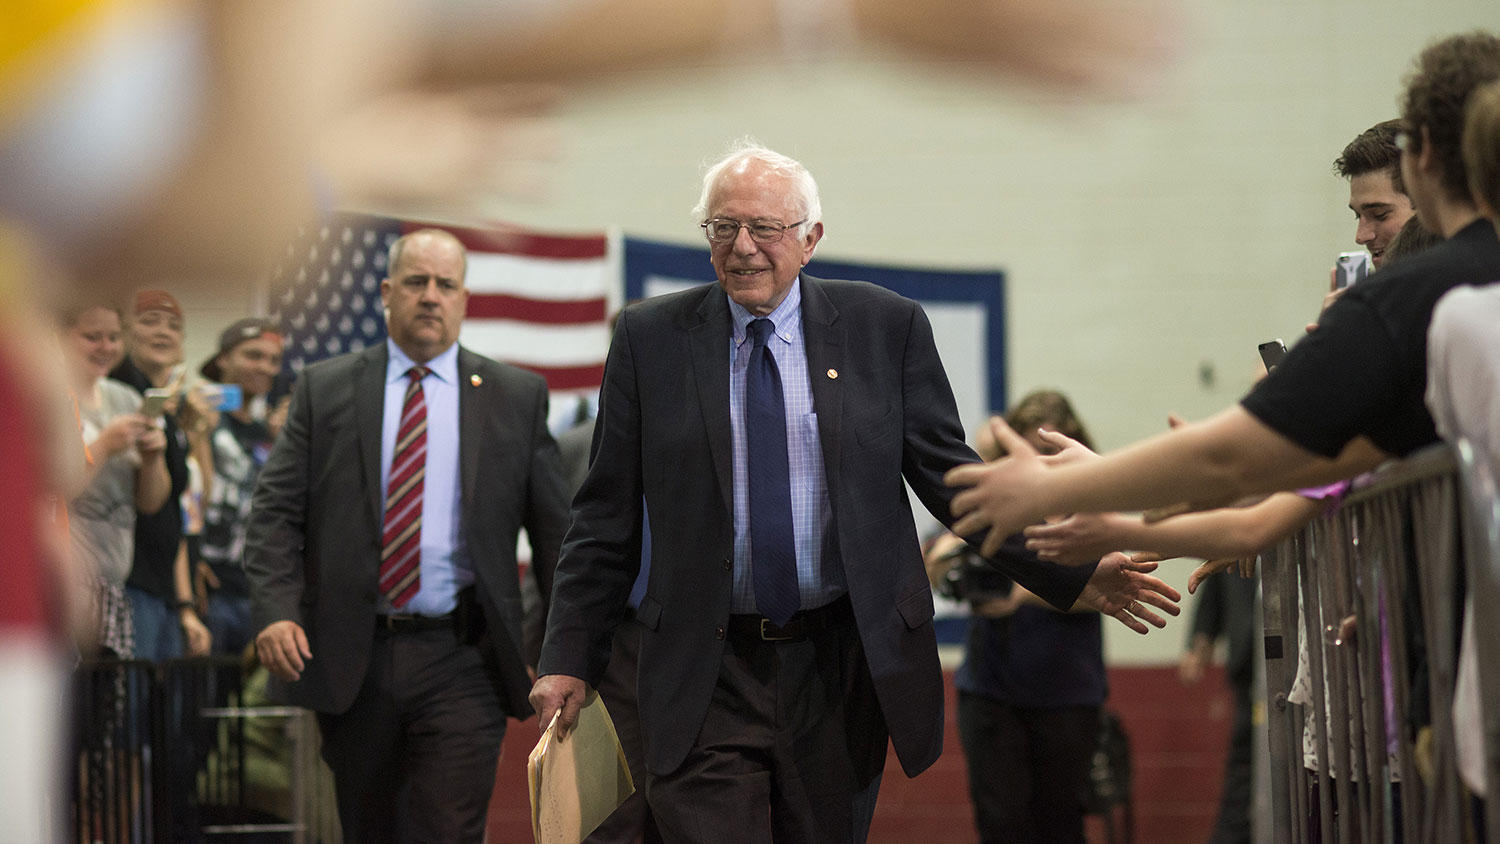 Senator Bernie Sanders greets attendees before speaking during a campaign event in Huntington, West Virginia, on April 26, 2016.
